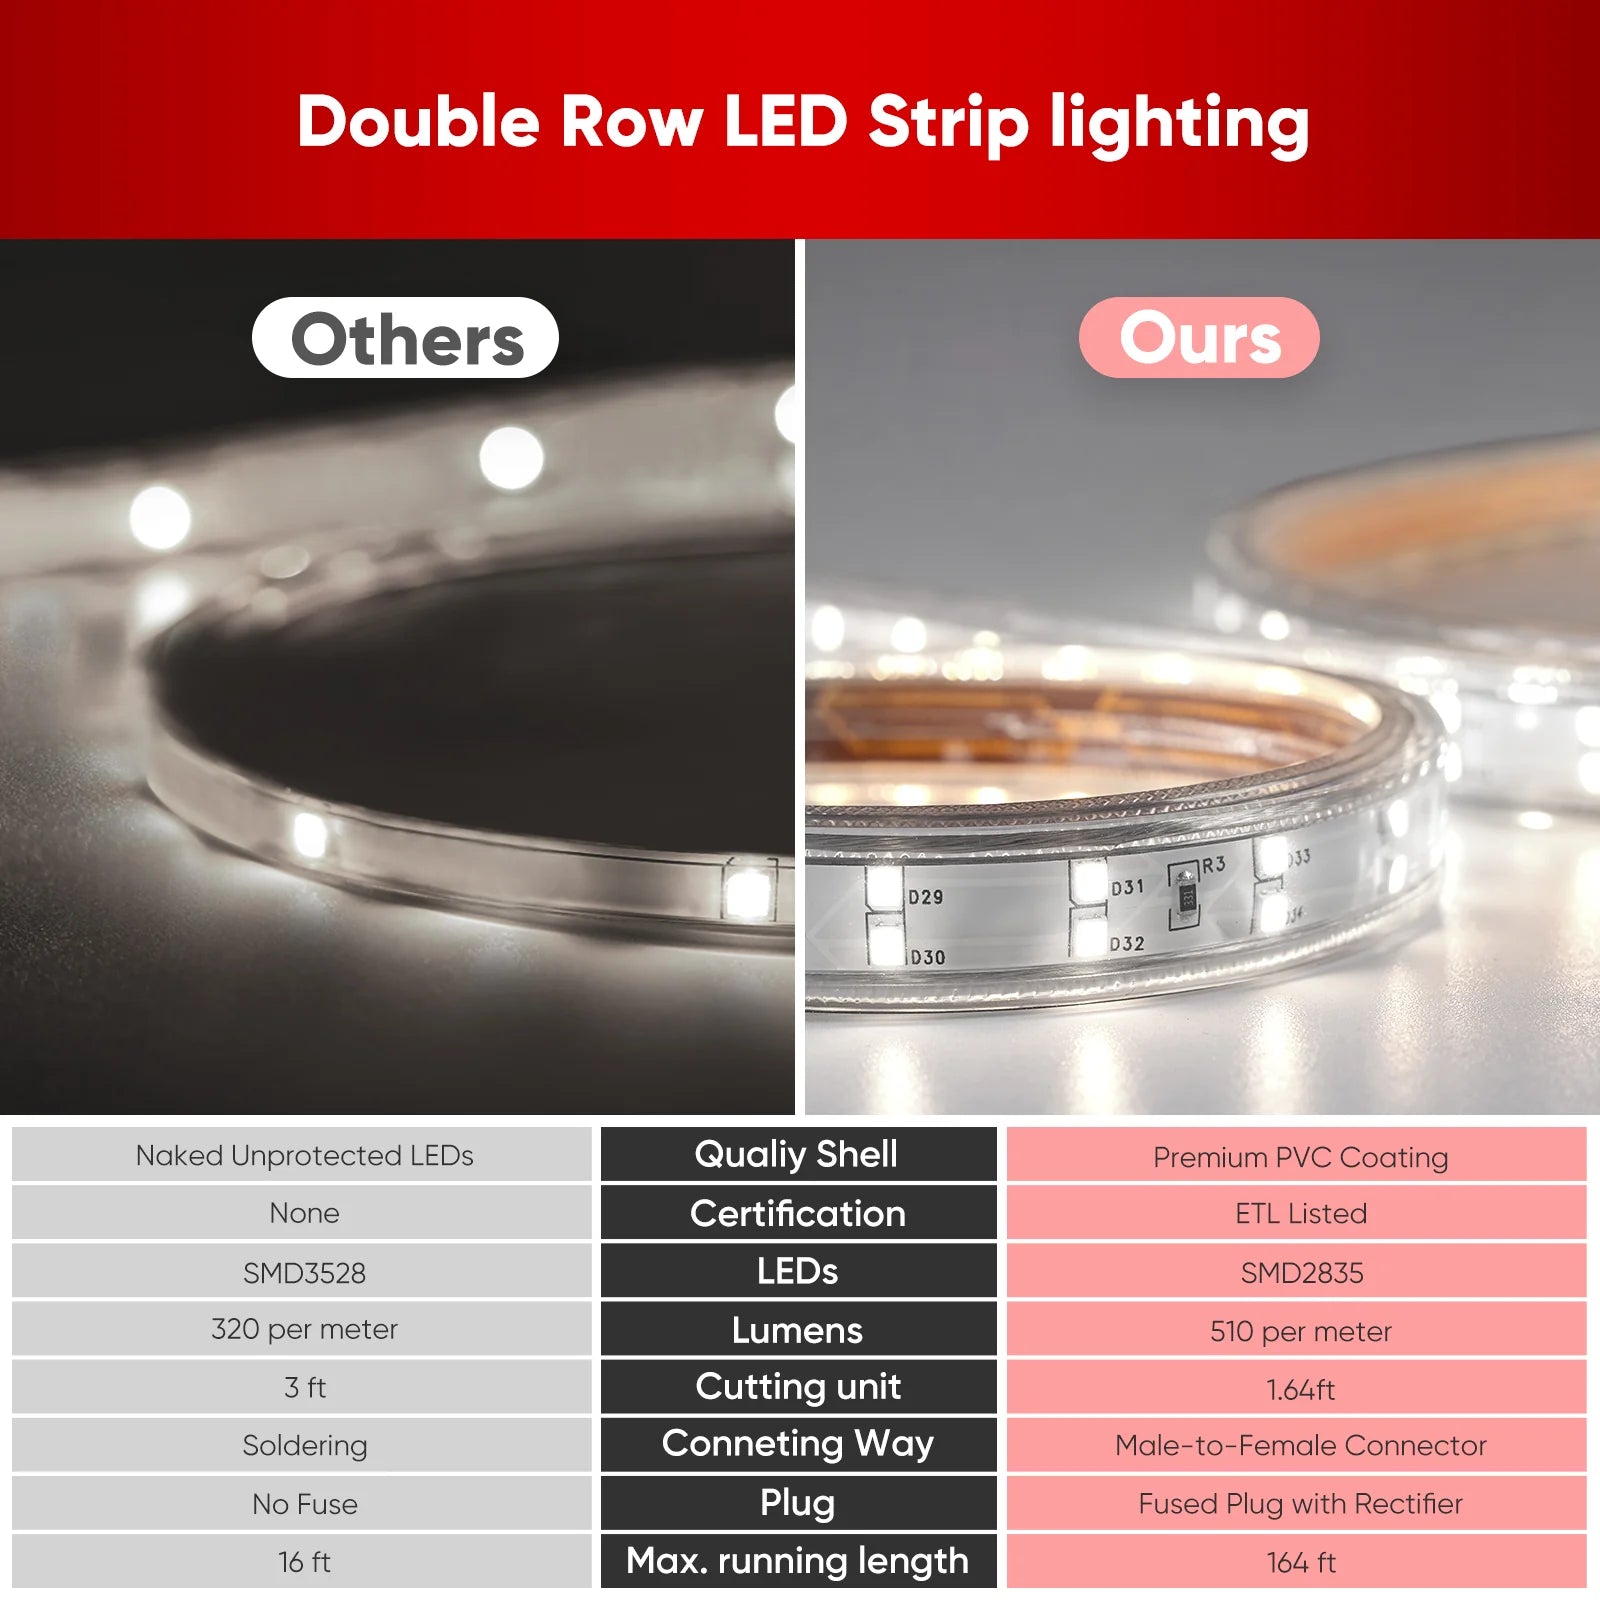 510 Lumen 2800K Super Bright LED Strip Lights for Indoor and Outdoor Use - Dimmable, CCT Tunable, Easy to Install